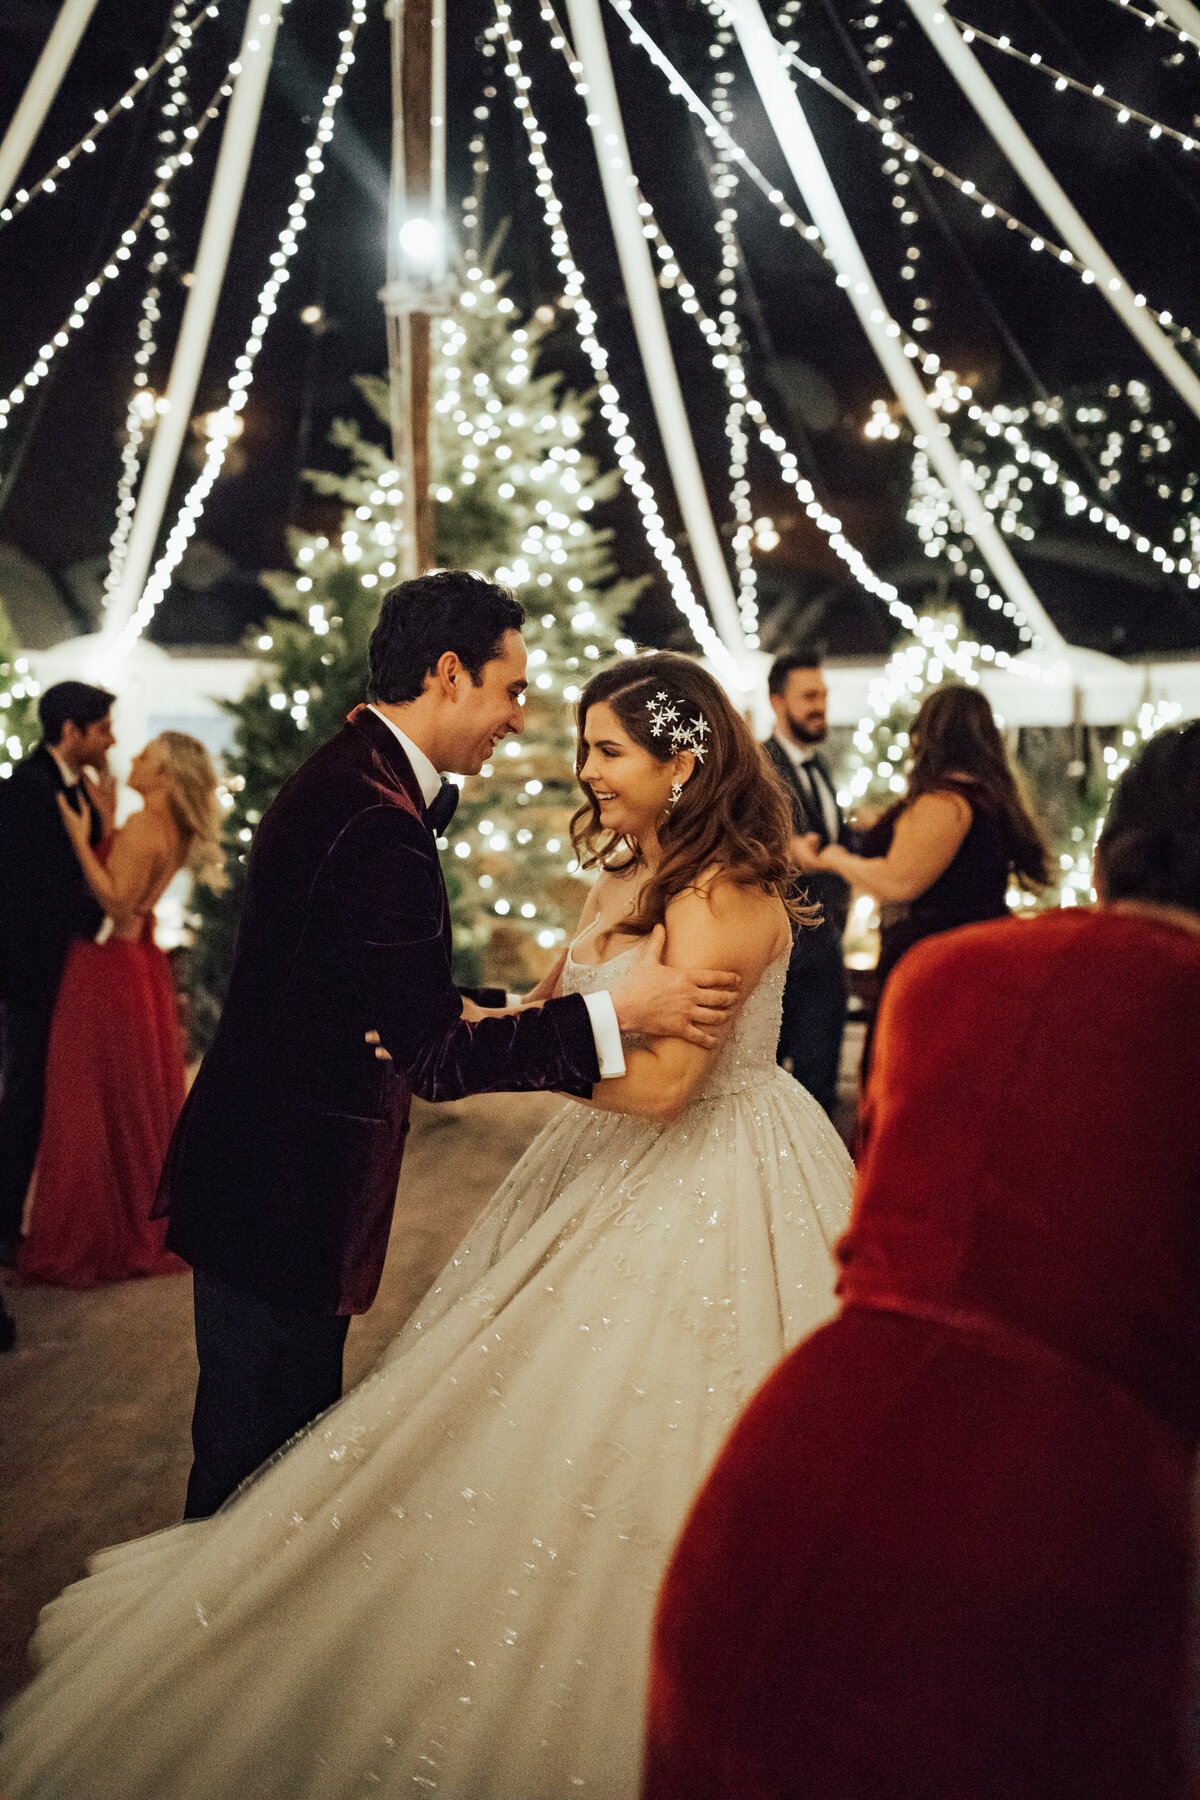 Christy-l-Johnston-Photography-Monica-Relyea-Events-Noelle-Downing-Instagram-Noelle_s-Favorite-Day-Wedding-Battenfelds-Christmas-tree-farm-Red-Hook-New-York-Hudson-Valley-upstate-november-2019-AP1A9955